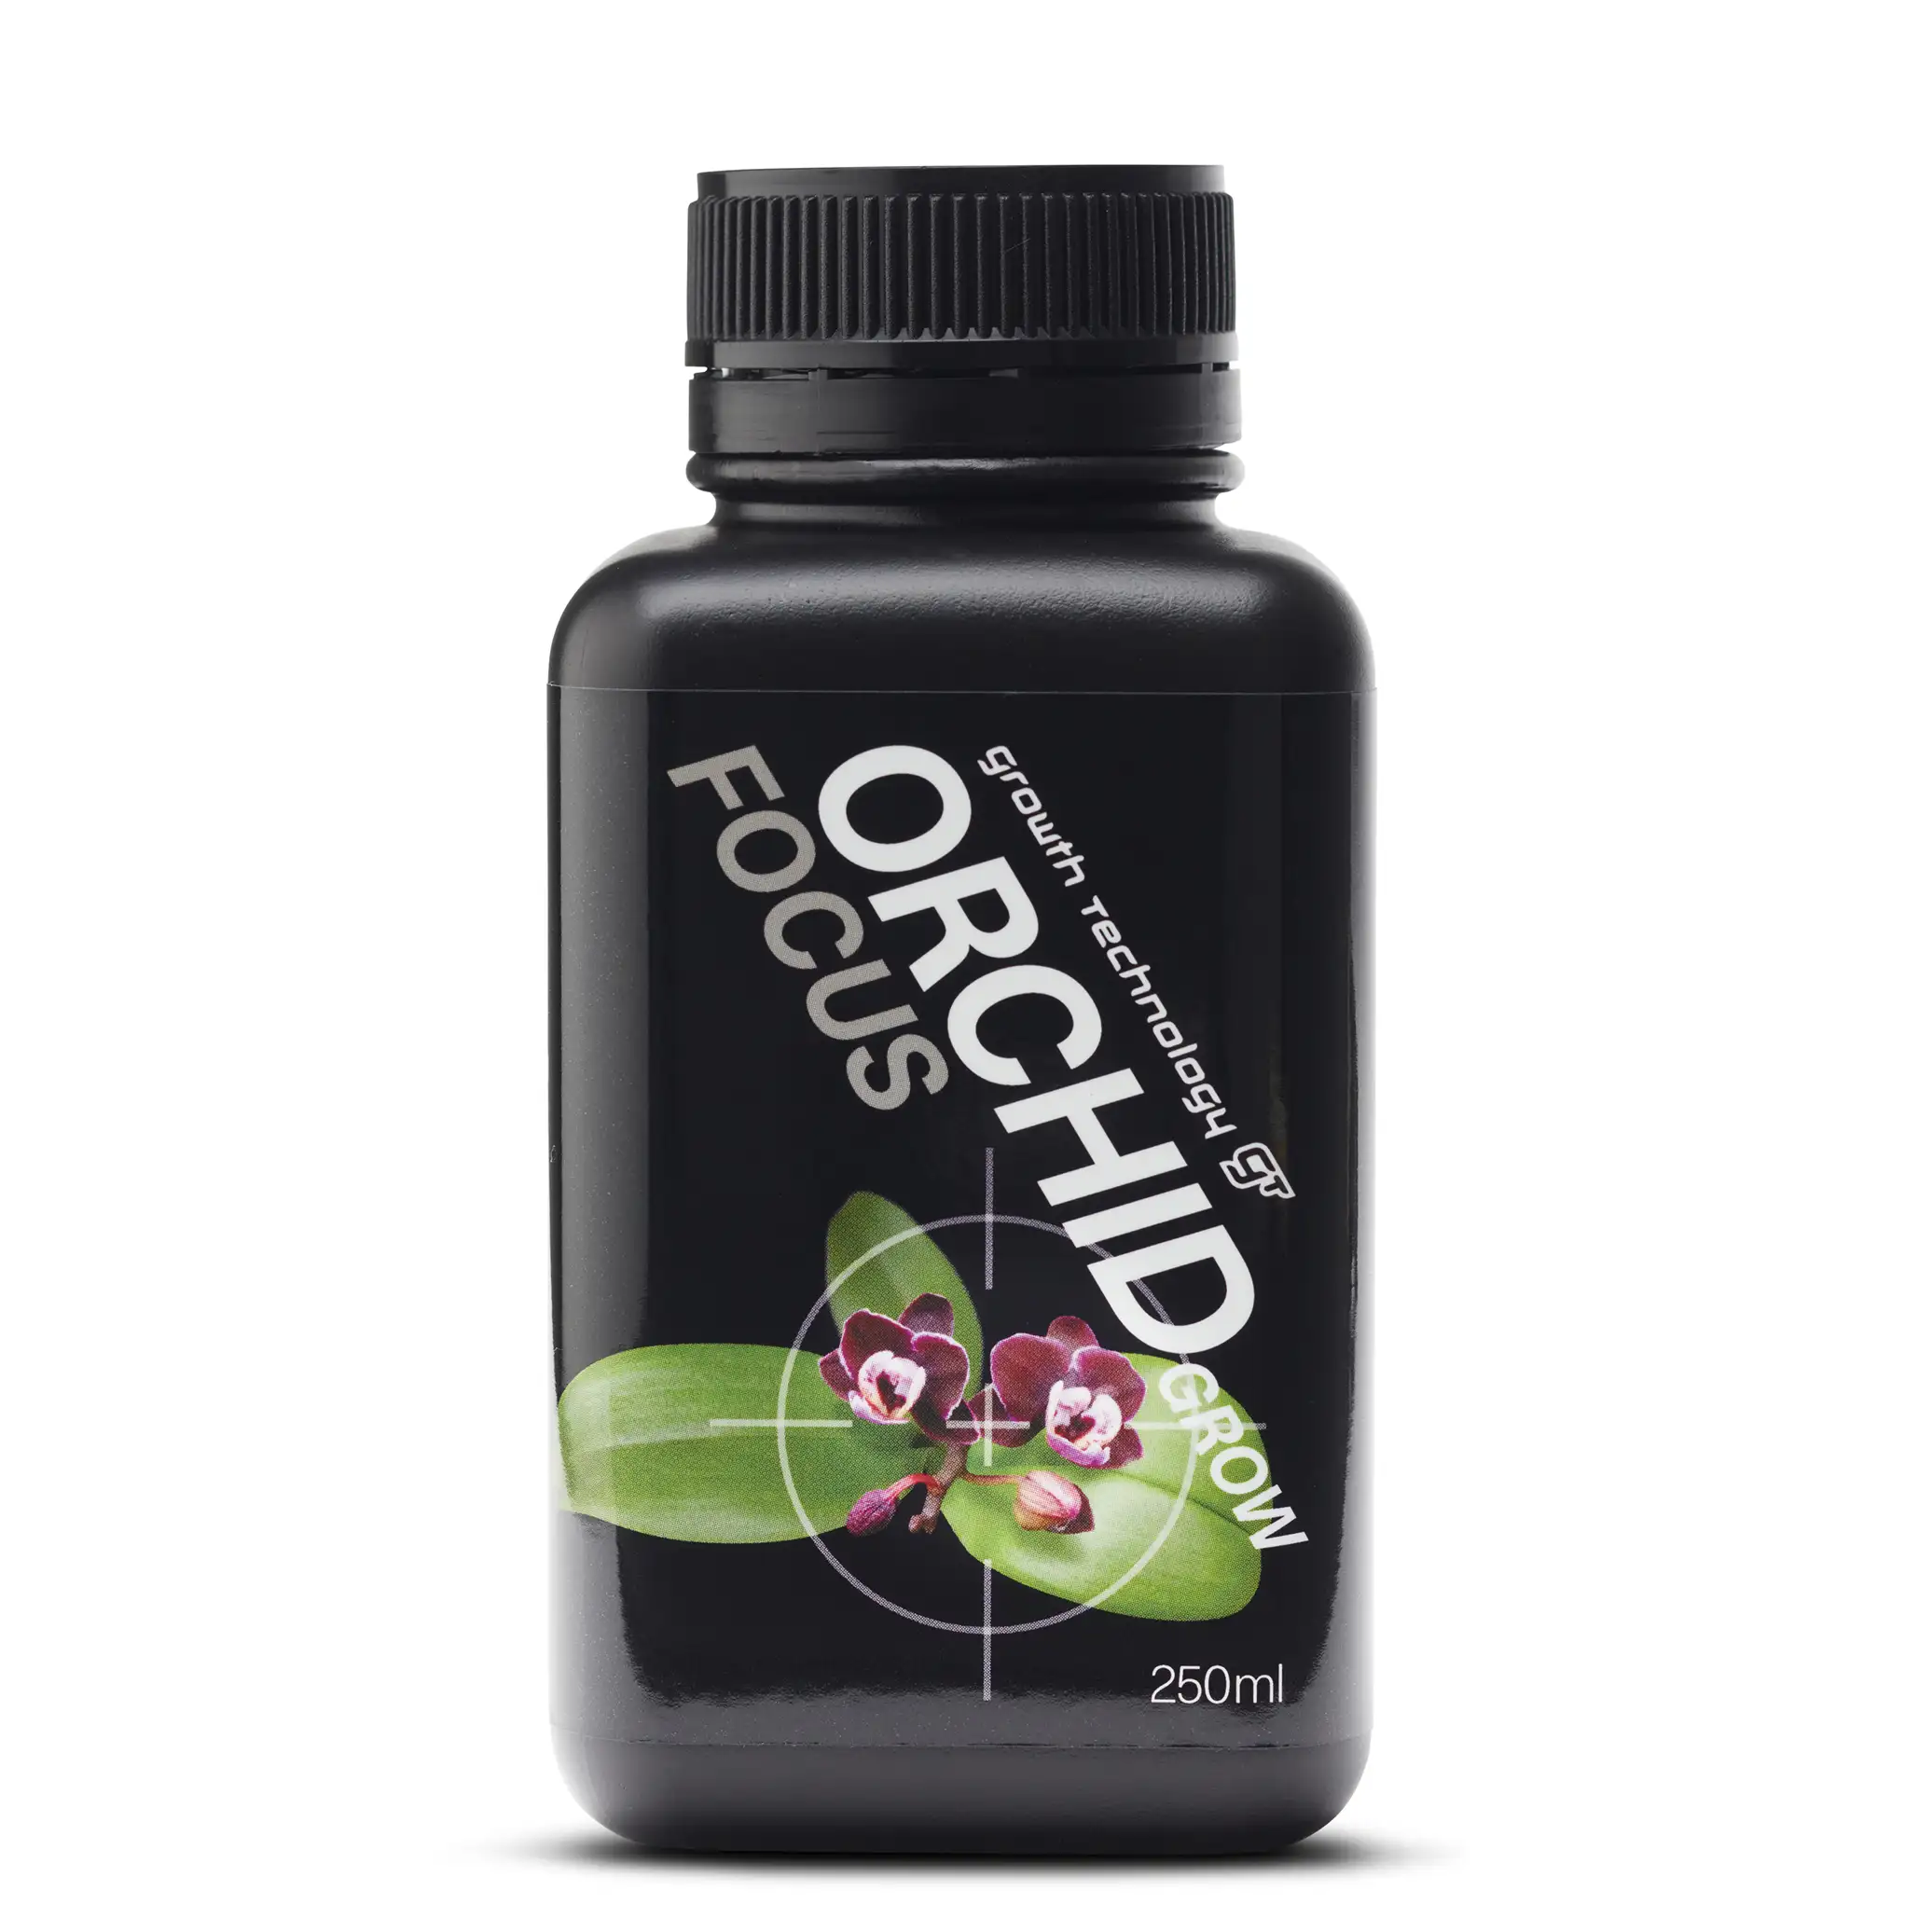 Orchid Focus Grow by Growth Technology